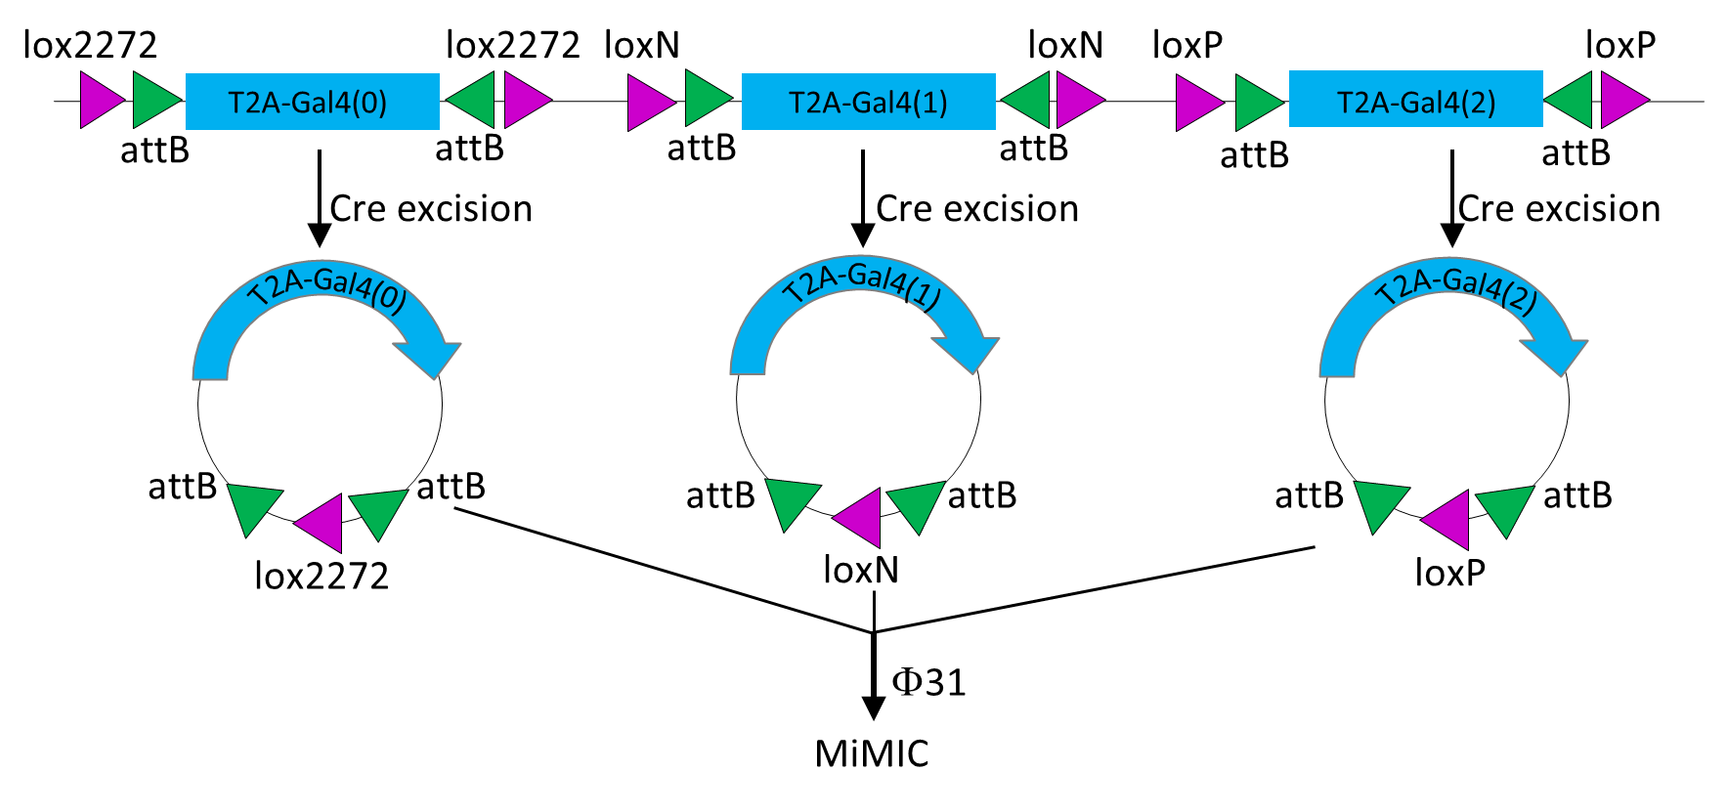 Illustration of excision of Trojan exon extrachromosomal circles from lox(Trojan-GAL4)x3} originating in Diao et al. (2015), Plug-and-Play Genetic Access to Drosophila Cell Types using Exchangeable Exon Cassettes. Cell Reports 10: 1410–1421